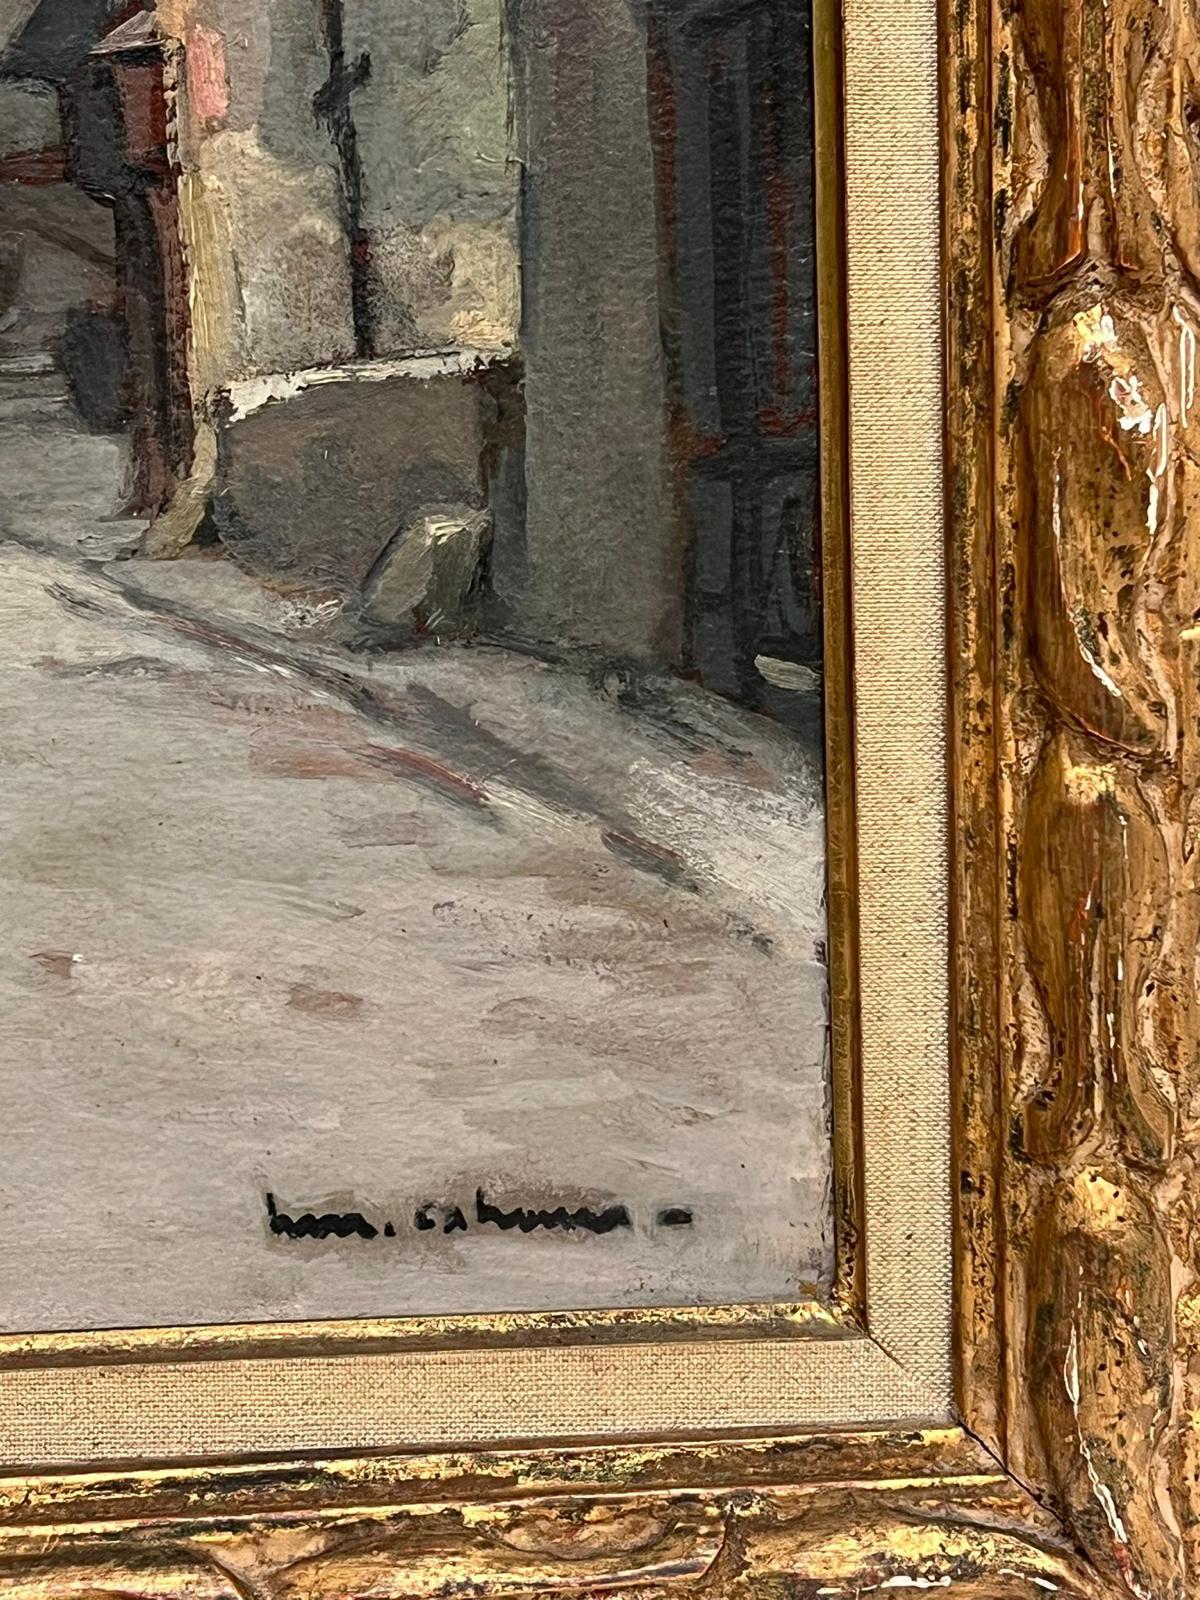 The Old French Street
by Henri Maurice Cahours (French 1889-1974)
signed oil on board, framed
framed: 29 x 22.5 inches
board: 22 x 15 inches
provenance: private collection, Provence, France
condition: very good and sound condition